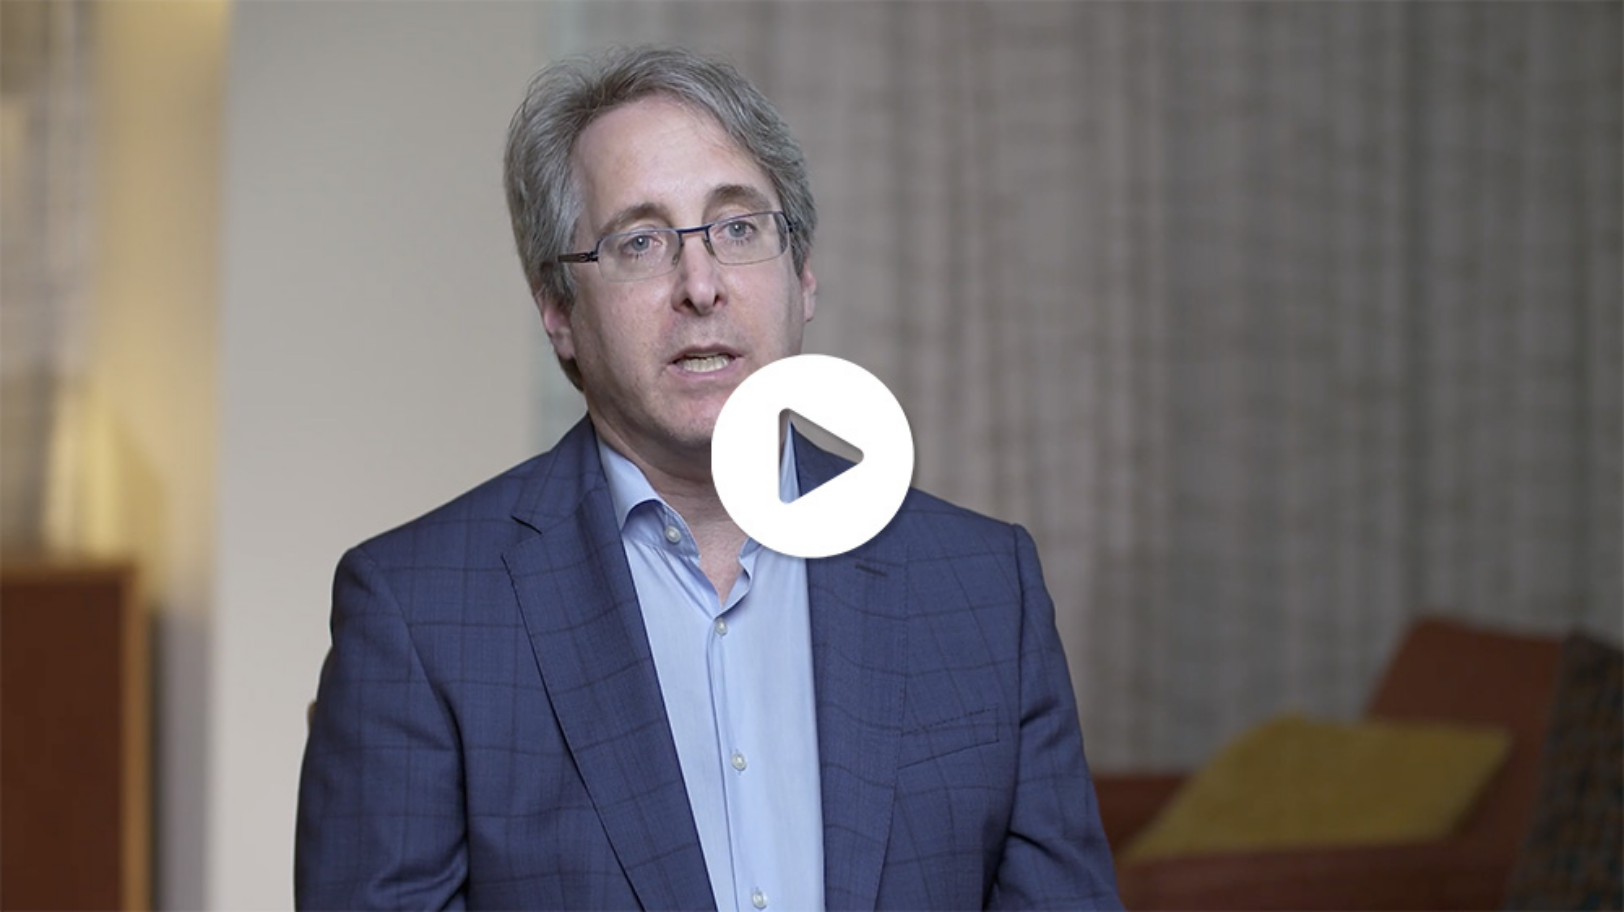 Video of Steven Wolf, MD, discussing profound seizure reduction and clinical study results on Dravet syndrome and FINTEPLA